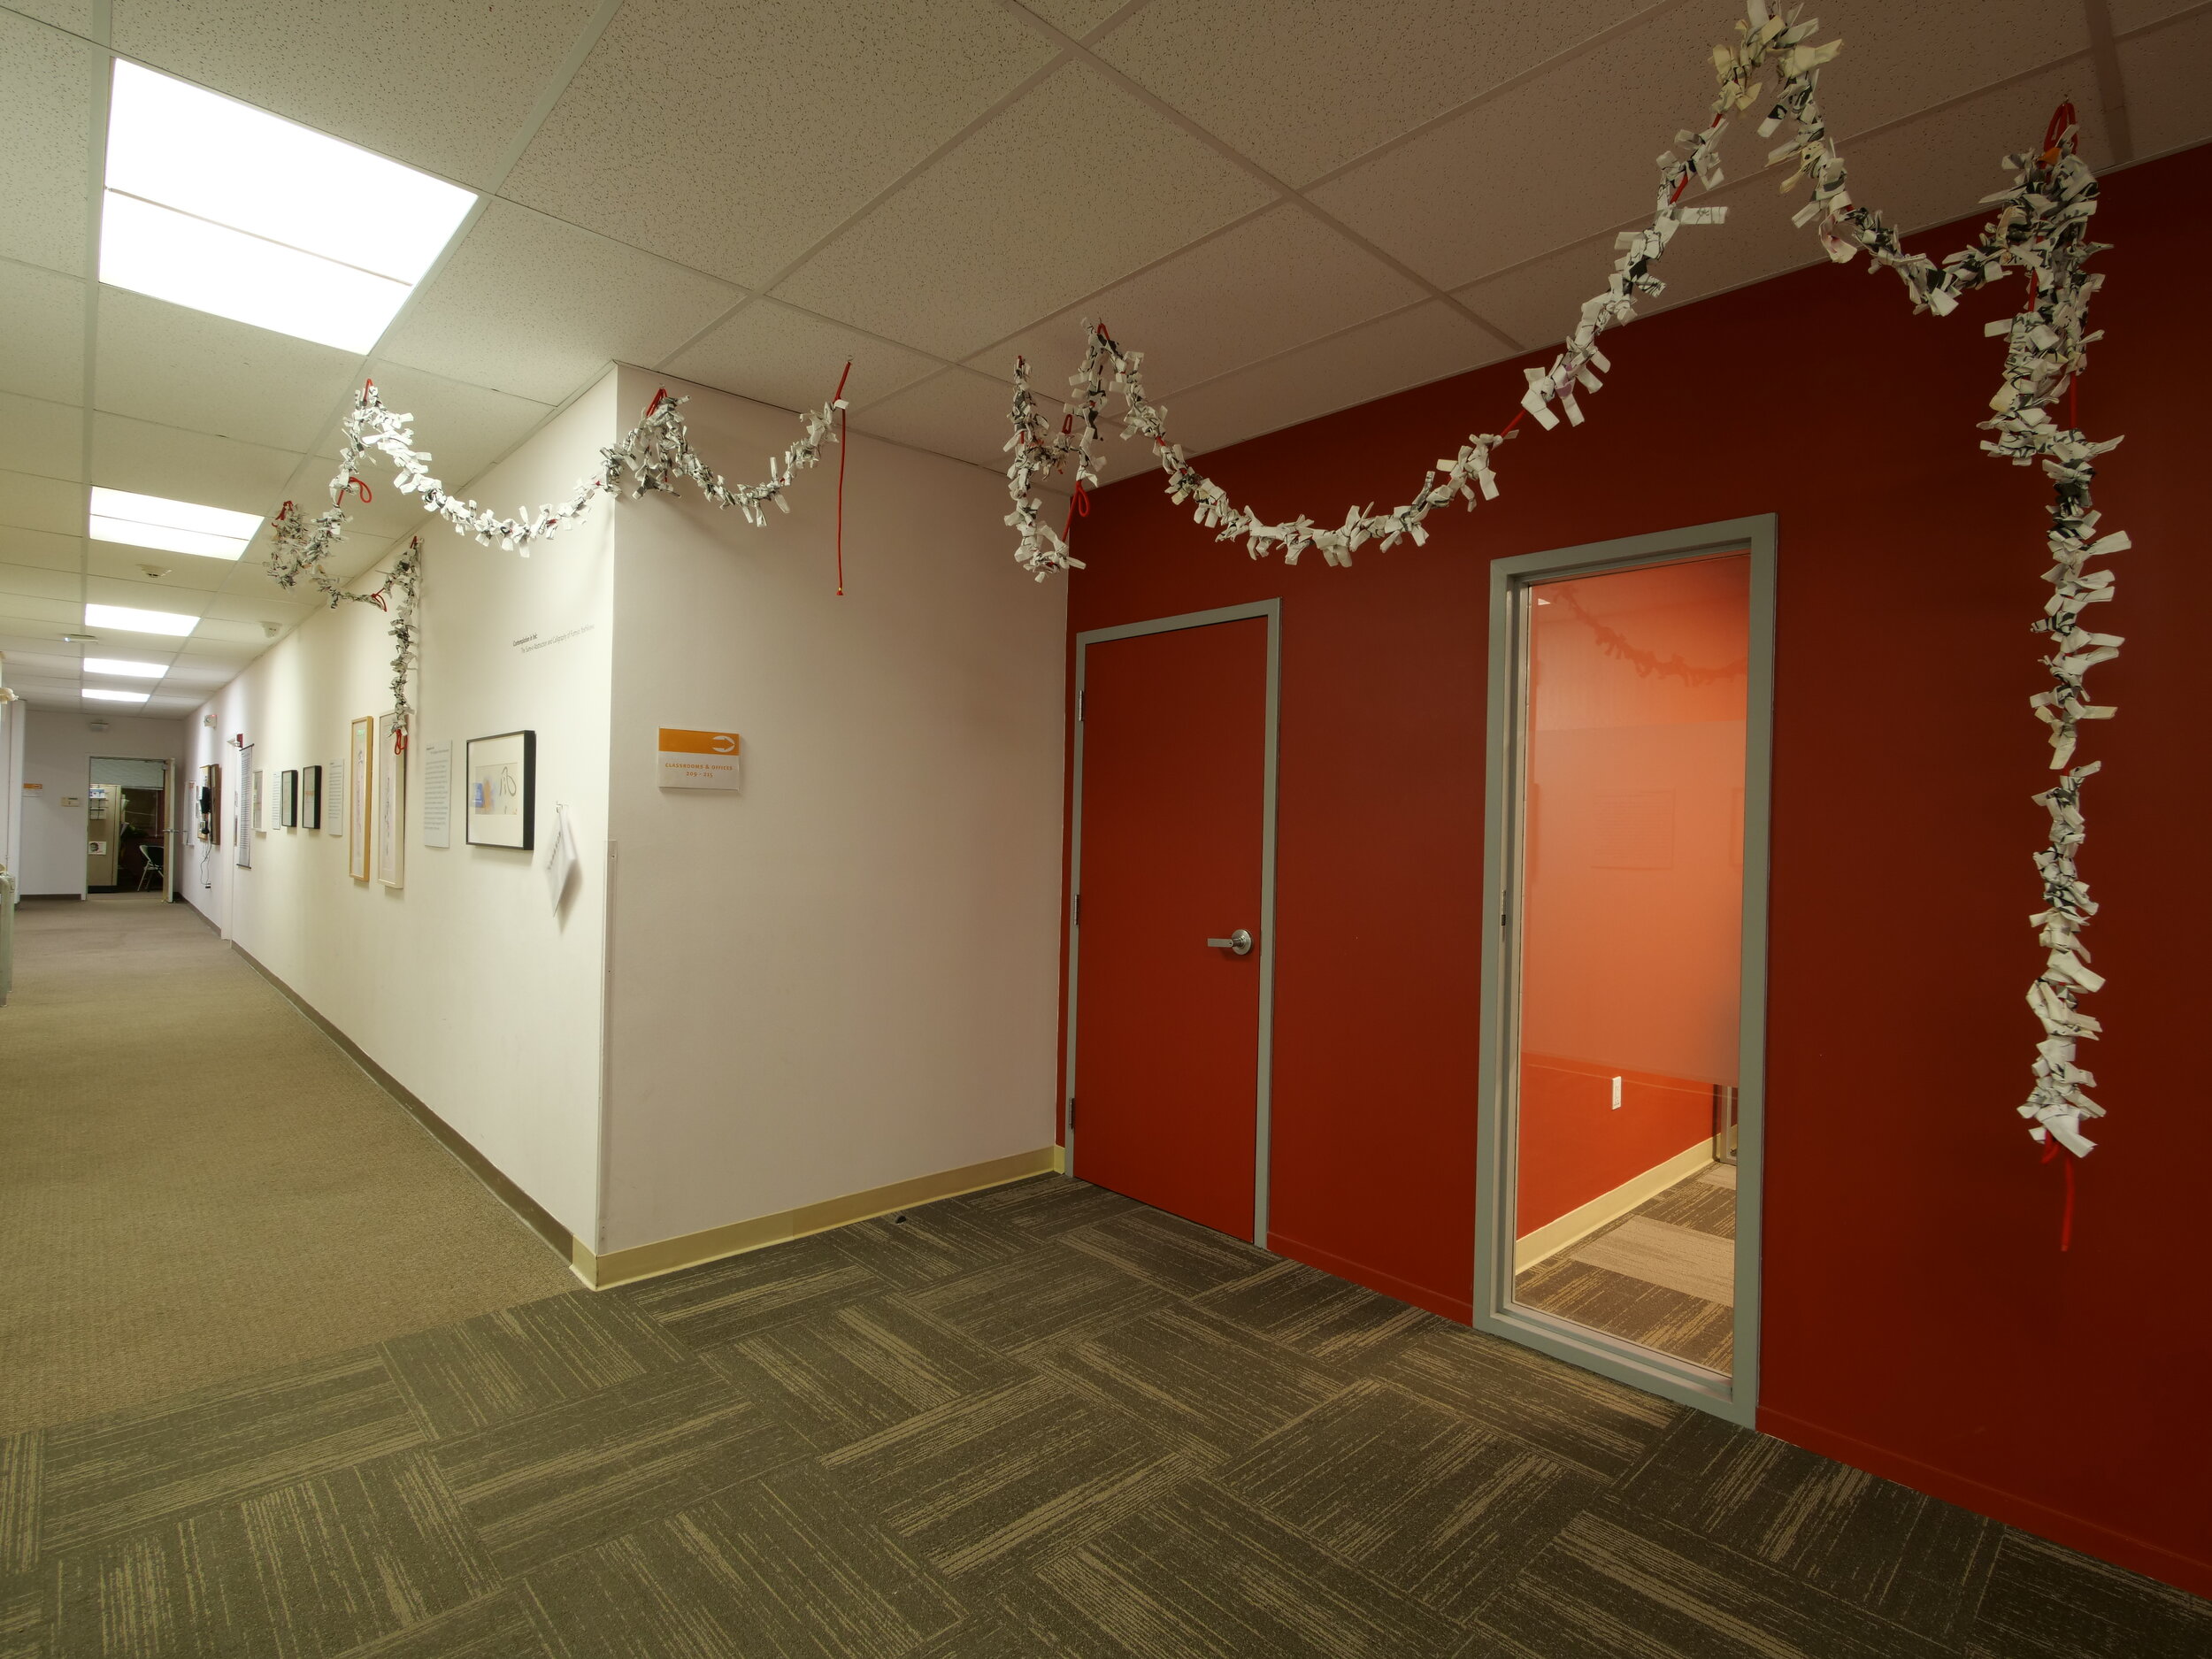 Hallway intersection draped in garlands of white material. 